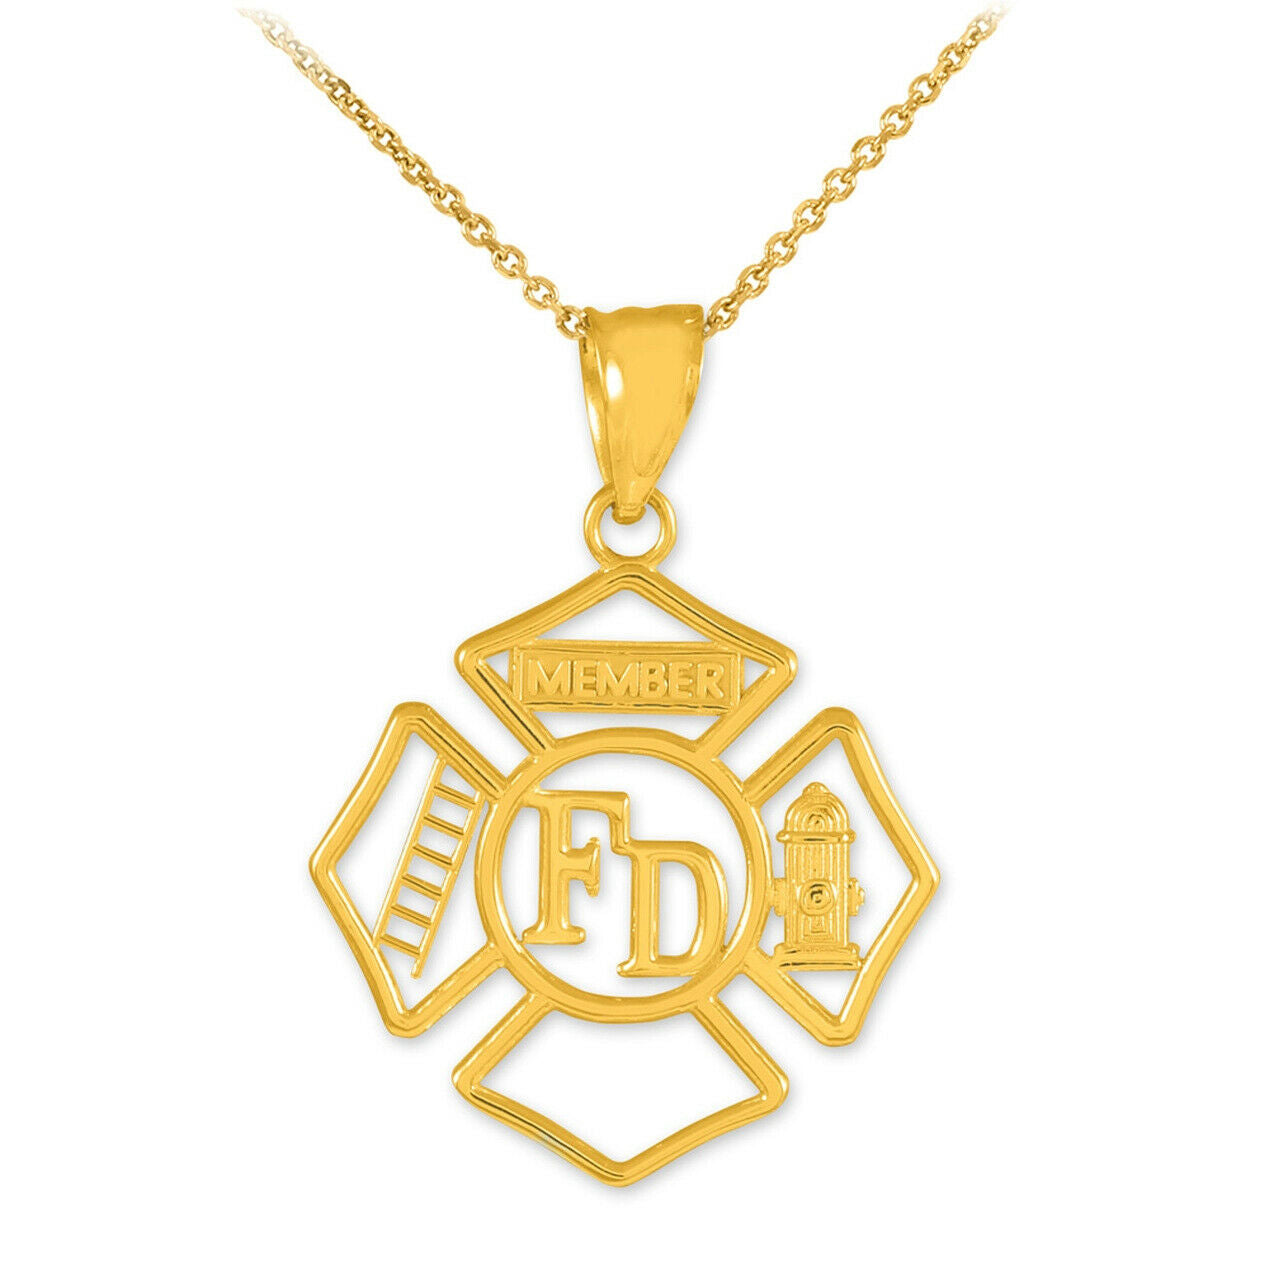 10k Solid Yellow Gold Fire Department Firefighter Member Badge Pendant Necklace